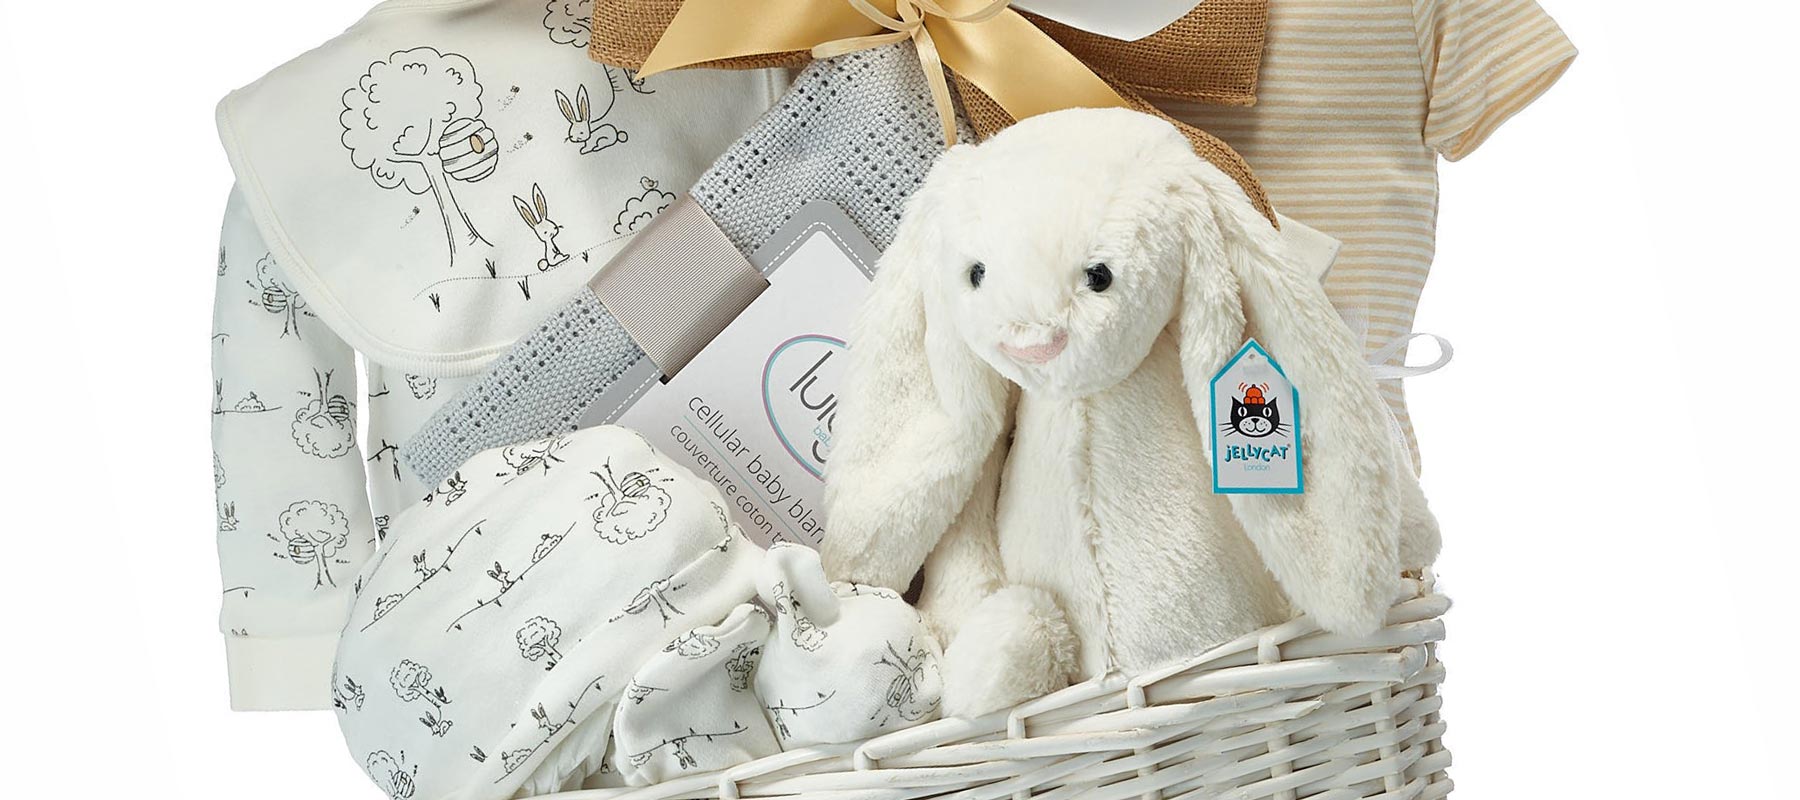 Do Babies Love Bunny or Bear Plushes More?